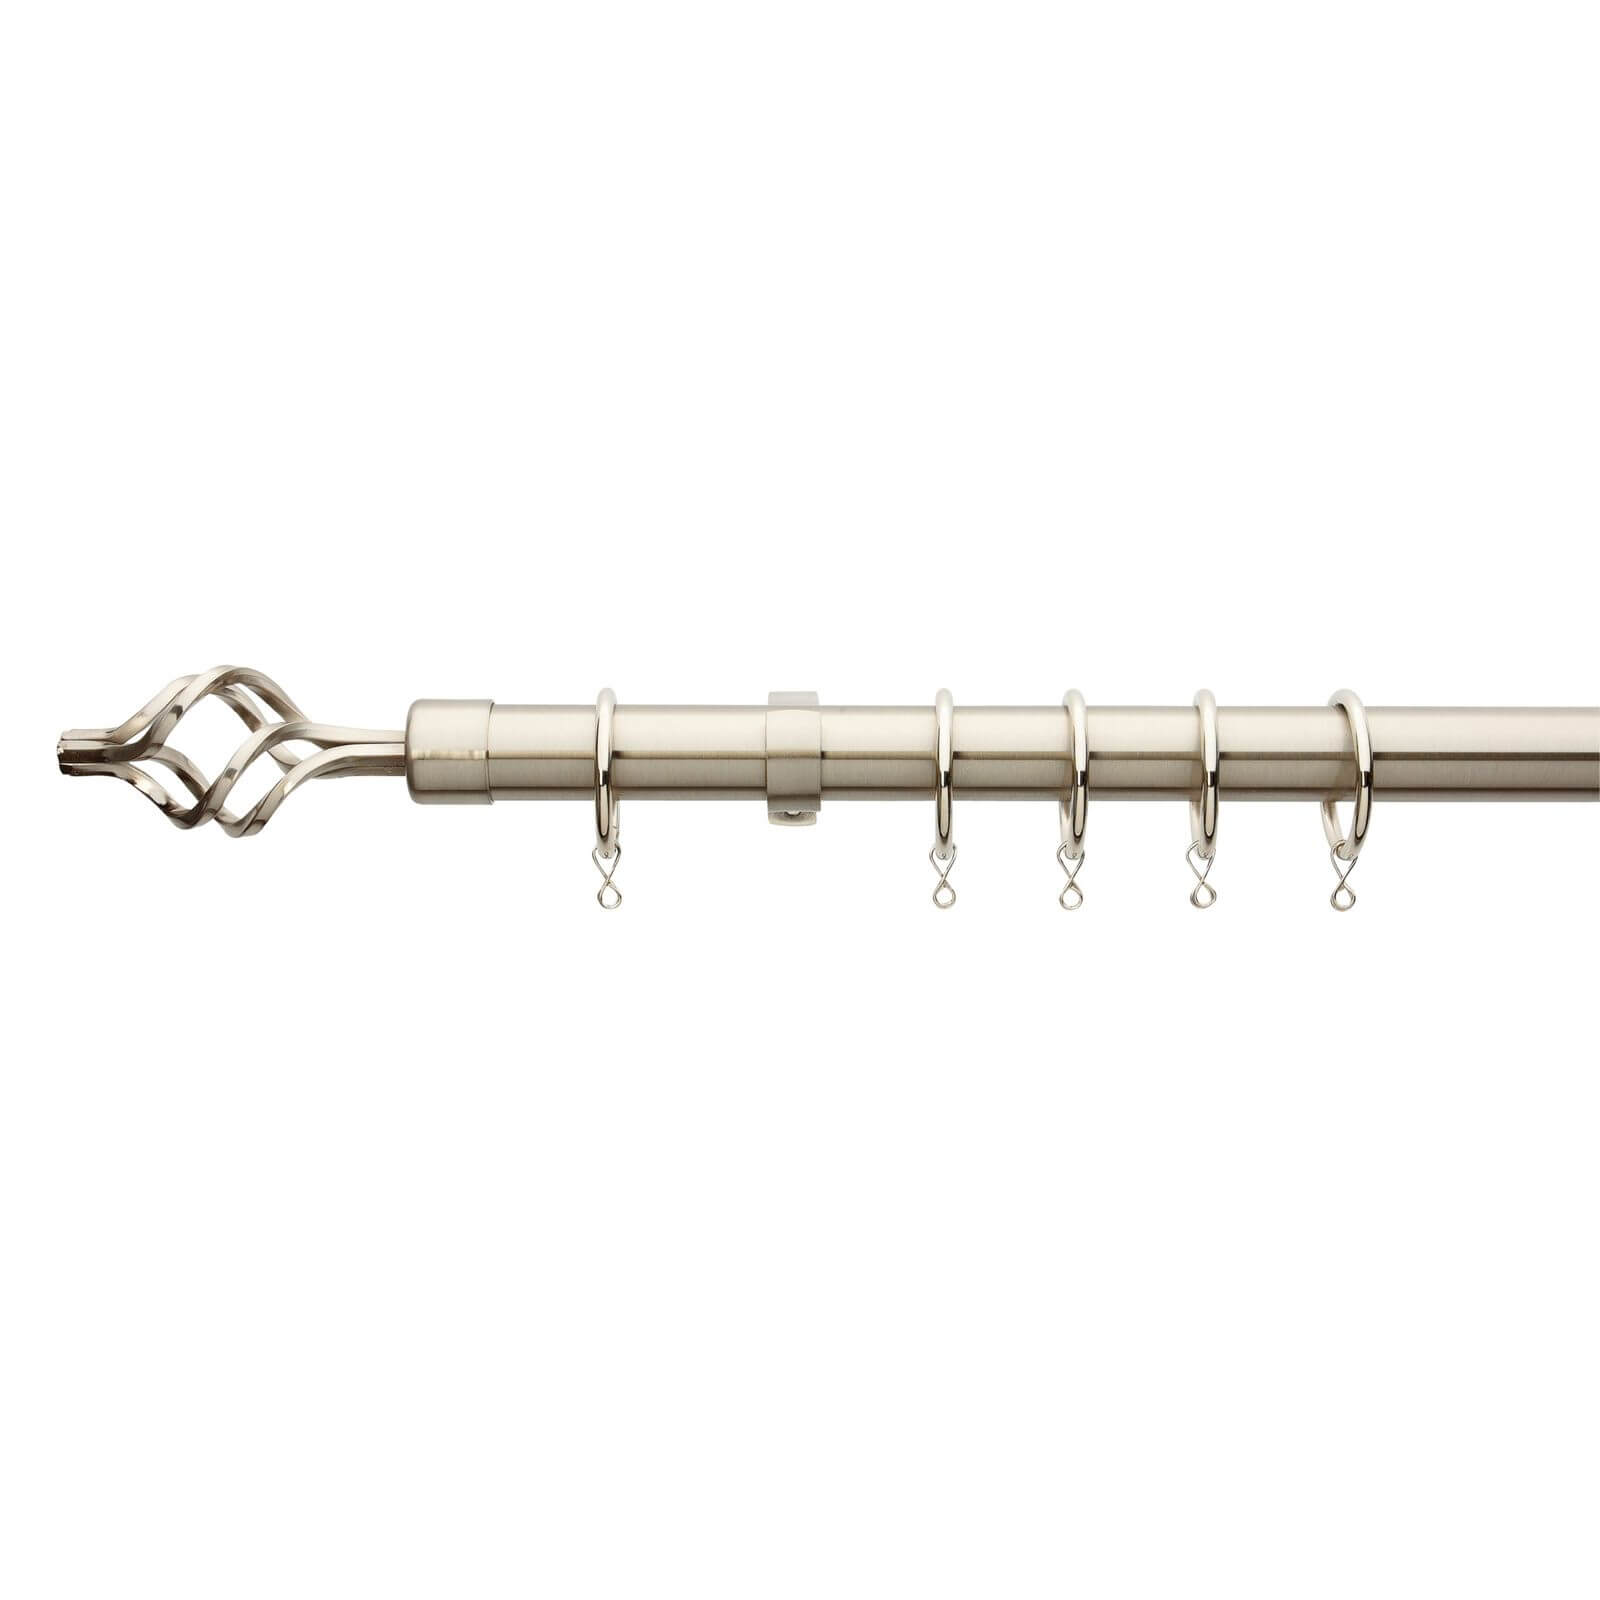 Extendable Cage Finial Curtain Pole - Satin Steel - 1.2-2.1m (25/28mm)